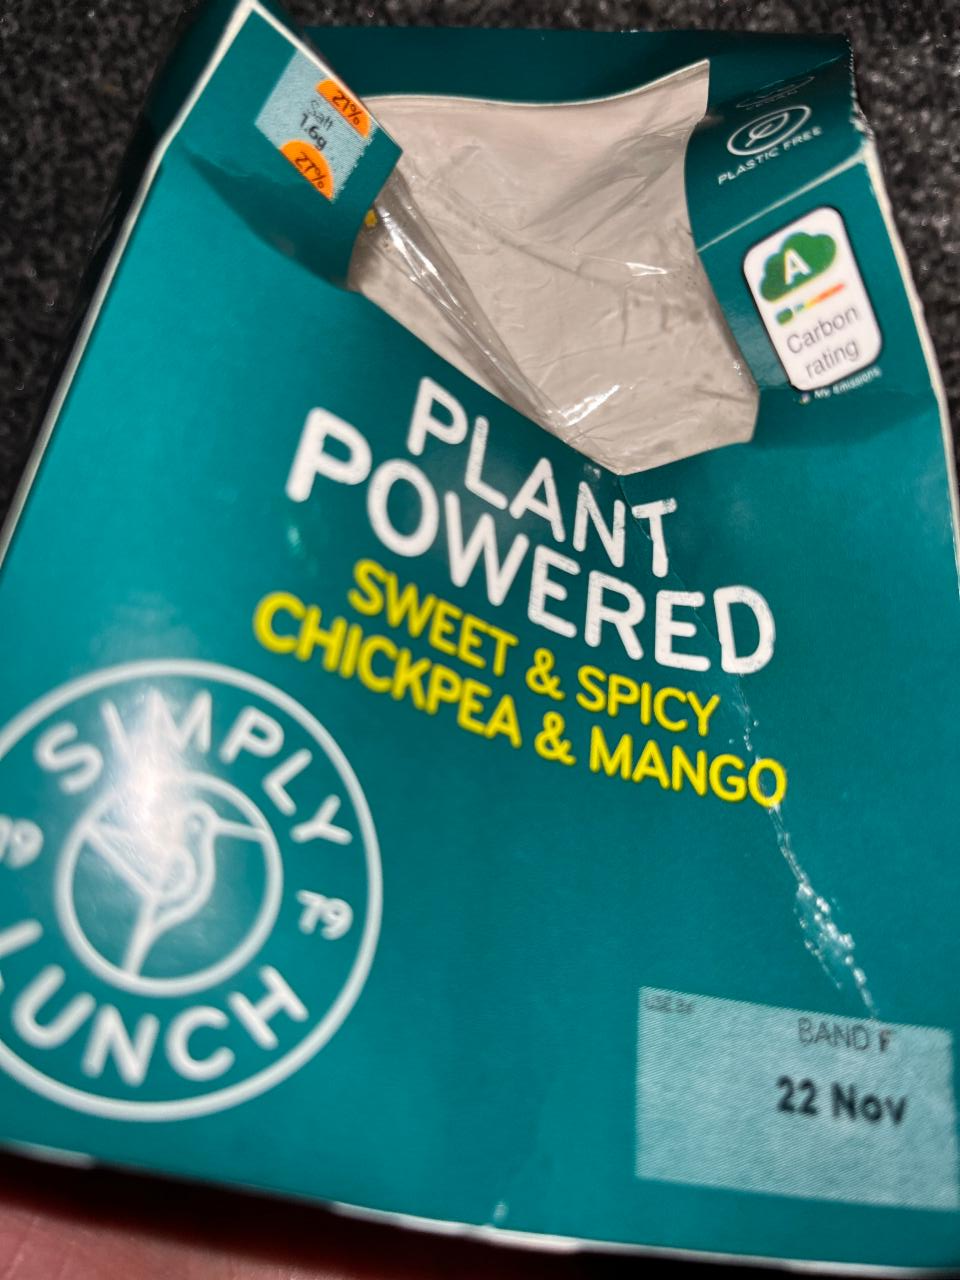 Fotografie - Plant powered sweet & spicy chickpea & mango Simply Lunch